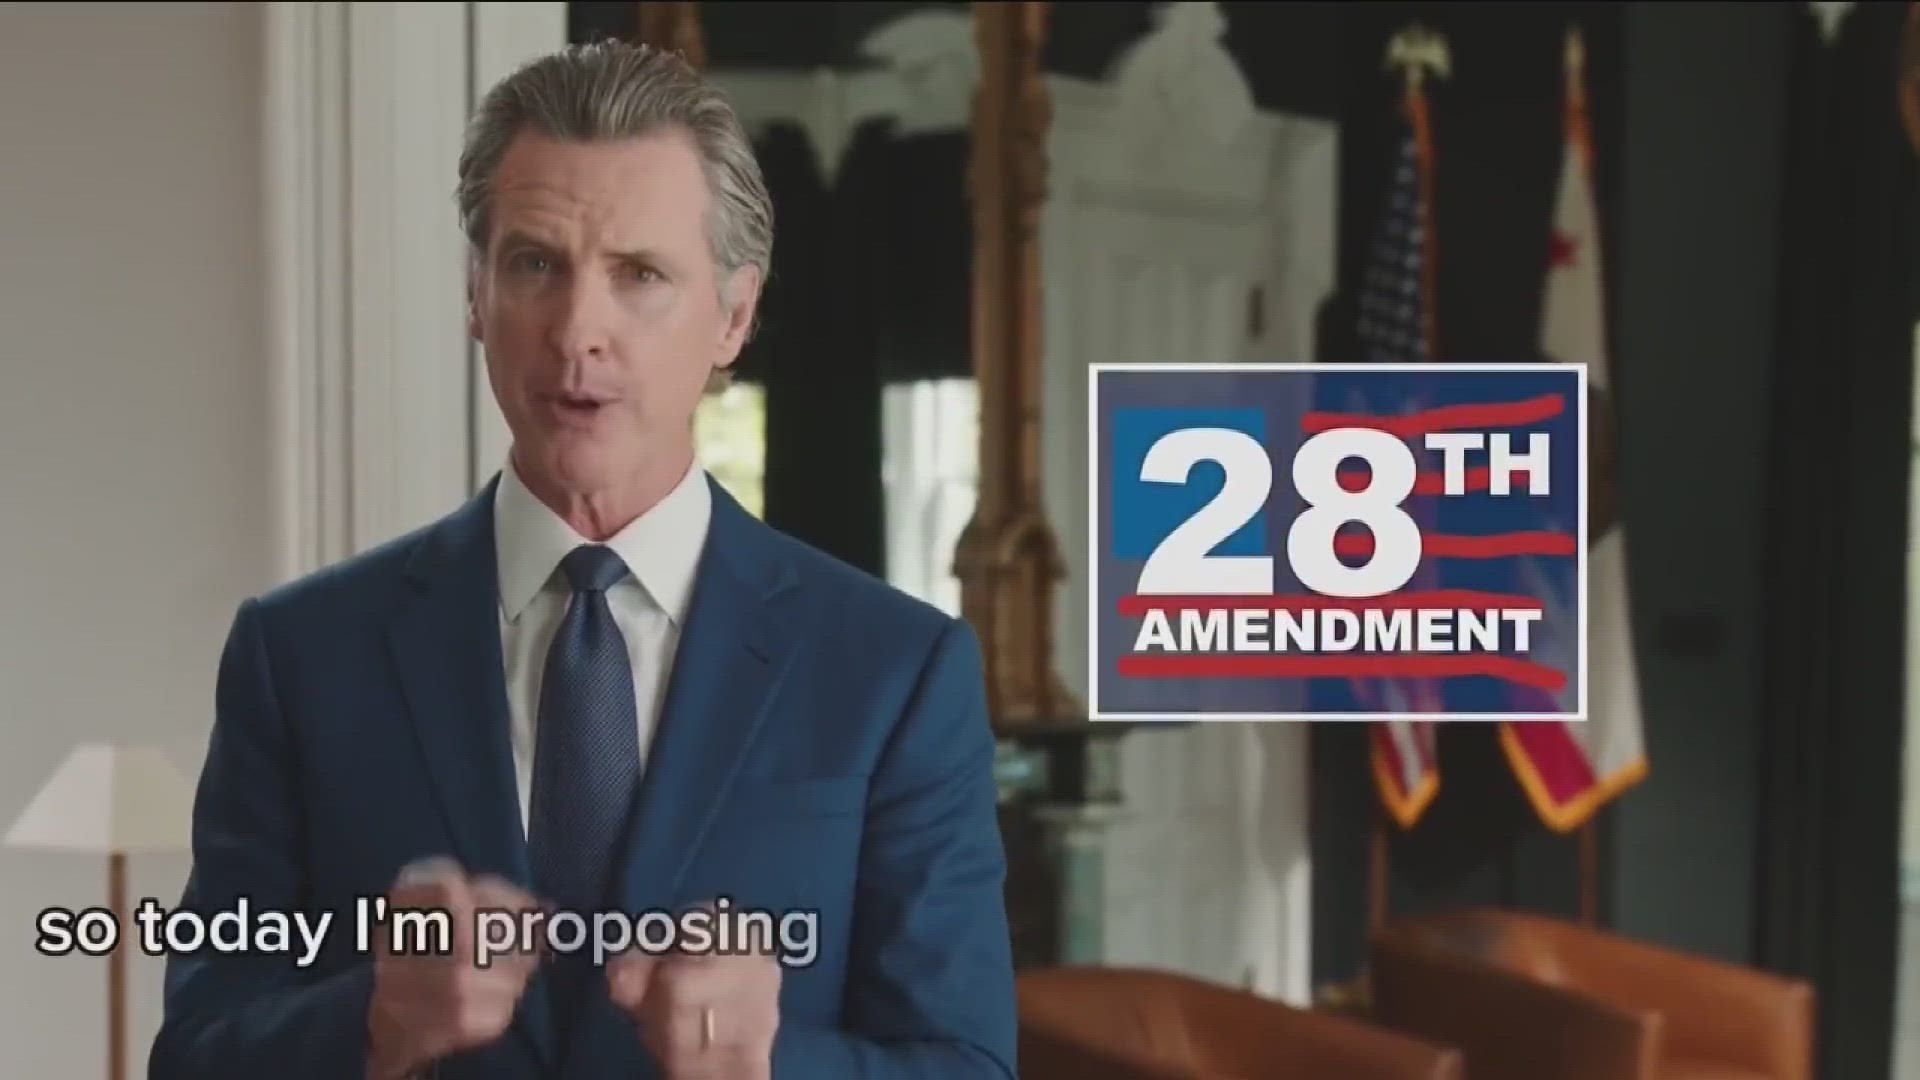 The proposal includes increasing the age to purchase a gun to 21 years old as well as universal background checks.